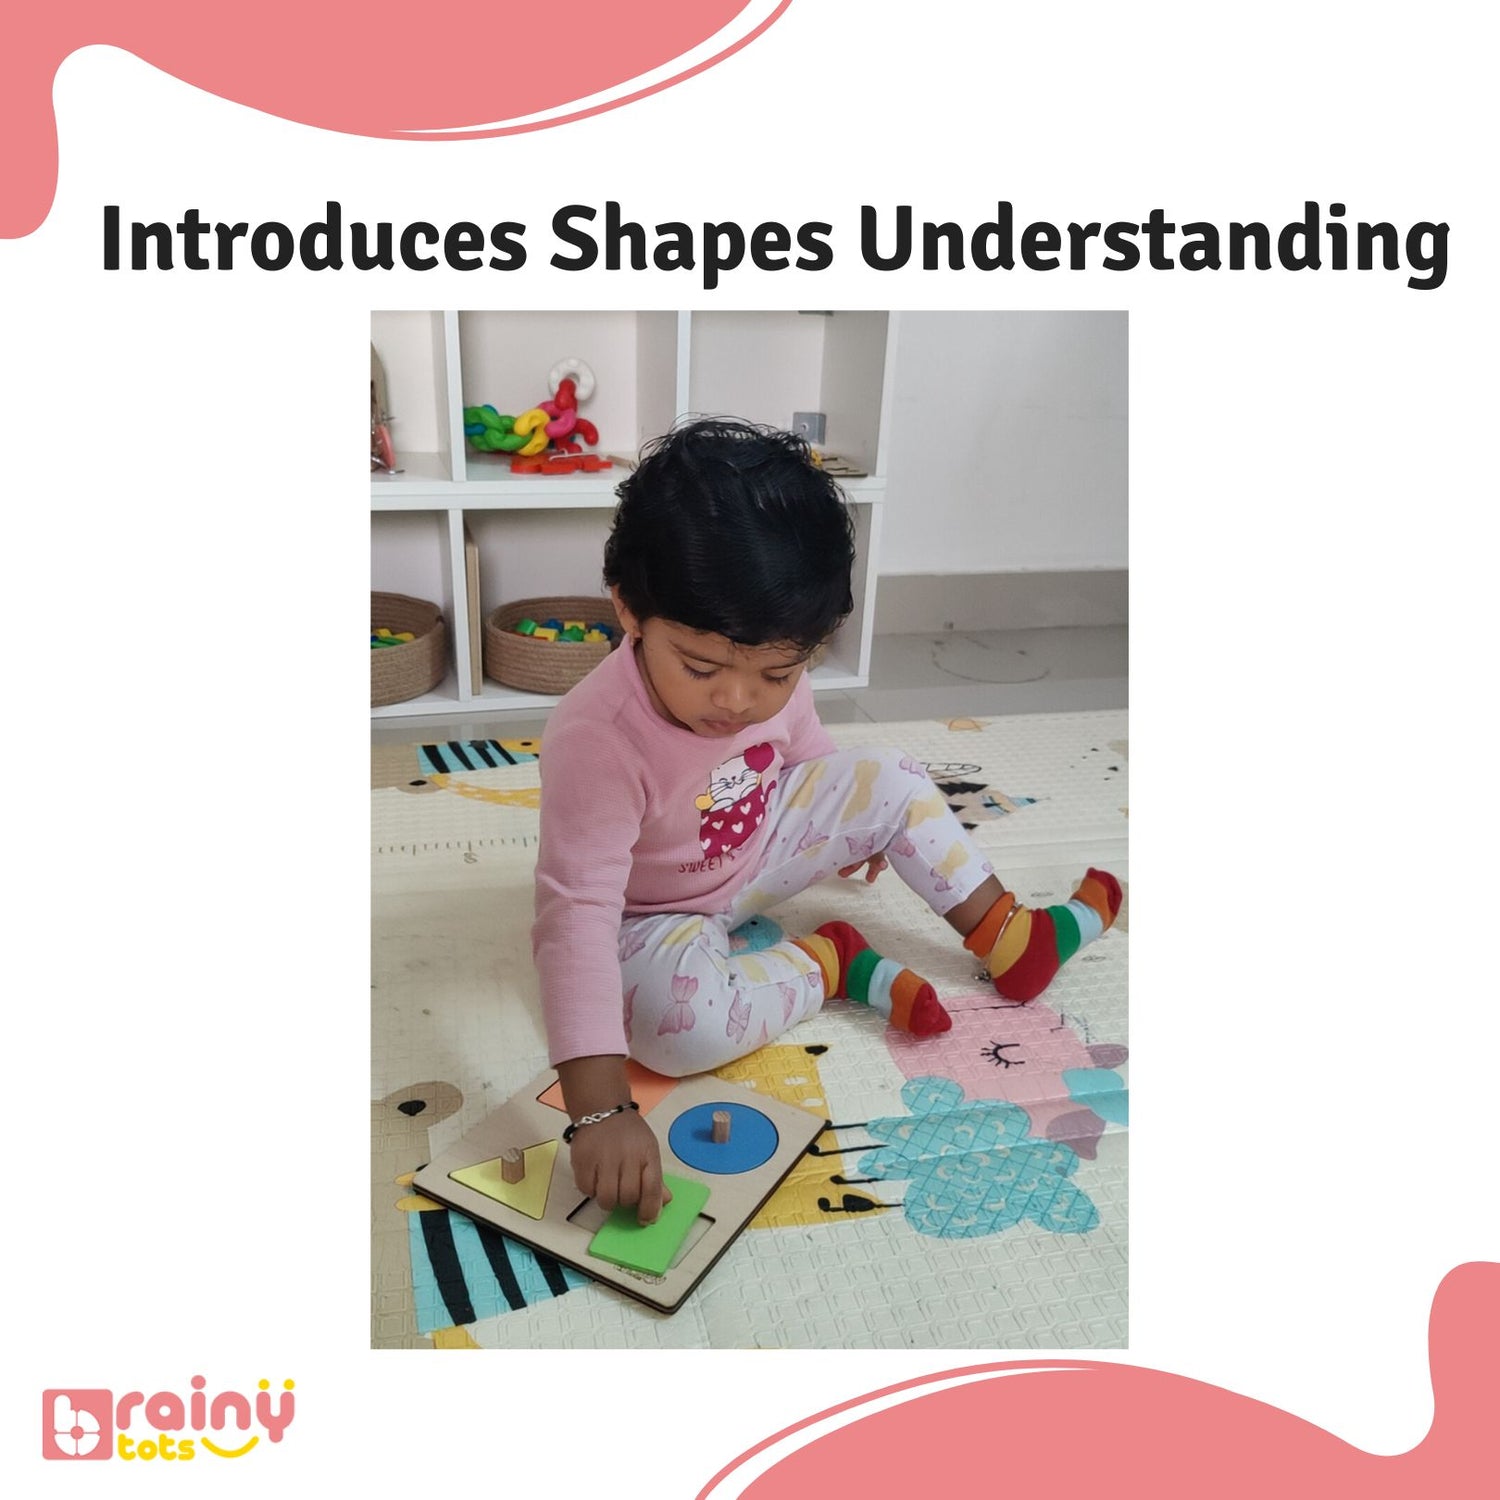 Introduce shape understanding with our 4 Shape Puzzles. These engaging puzzles provide a hands-on way for young learners to explore and identify different shapes, laying the foundation for shape recognition and spatial awareness skills essential for early childhood development.